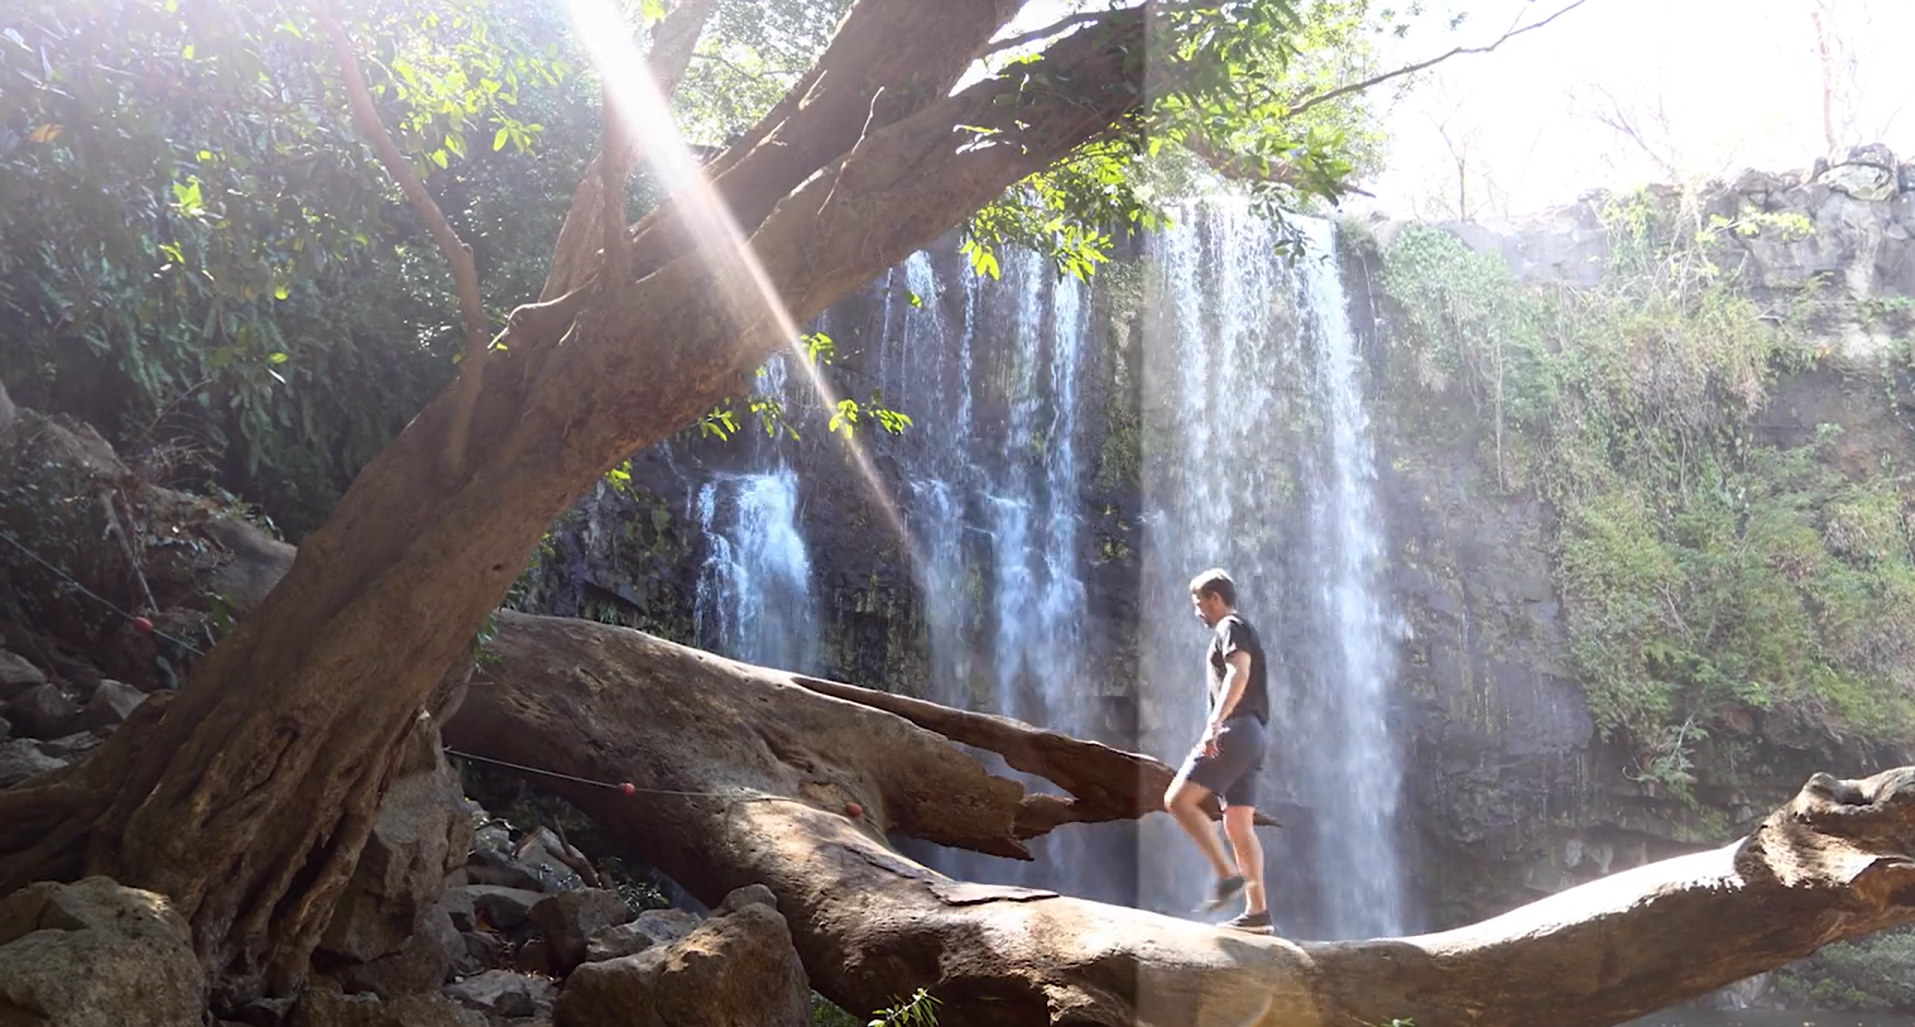 Specialty LUT applied to overexposed footage of a man walking by a waterfall.